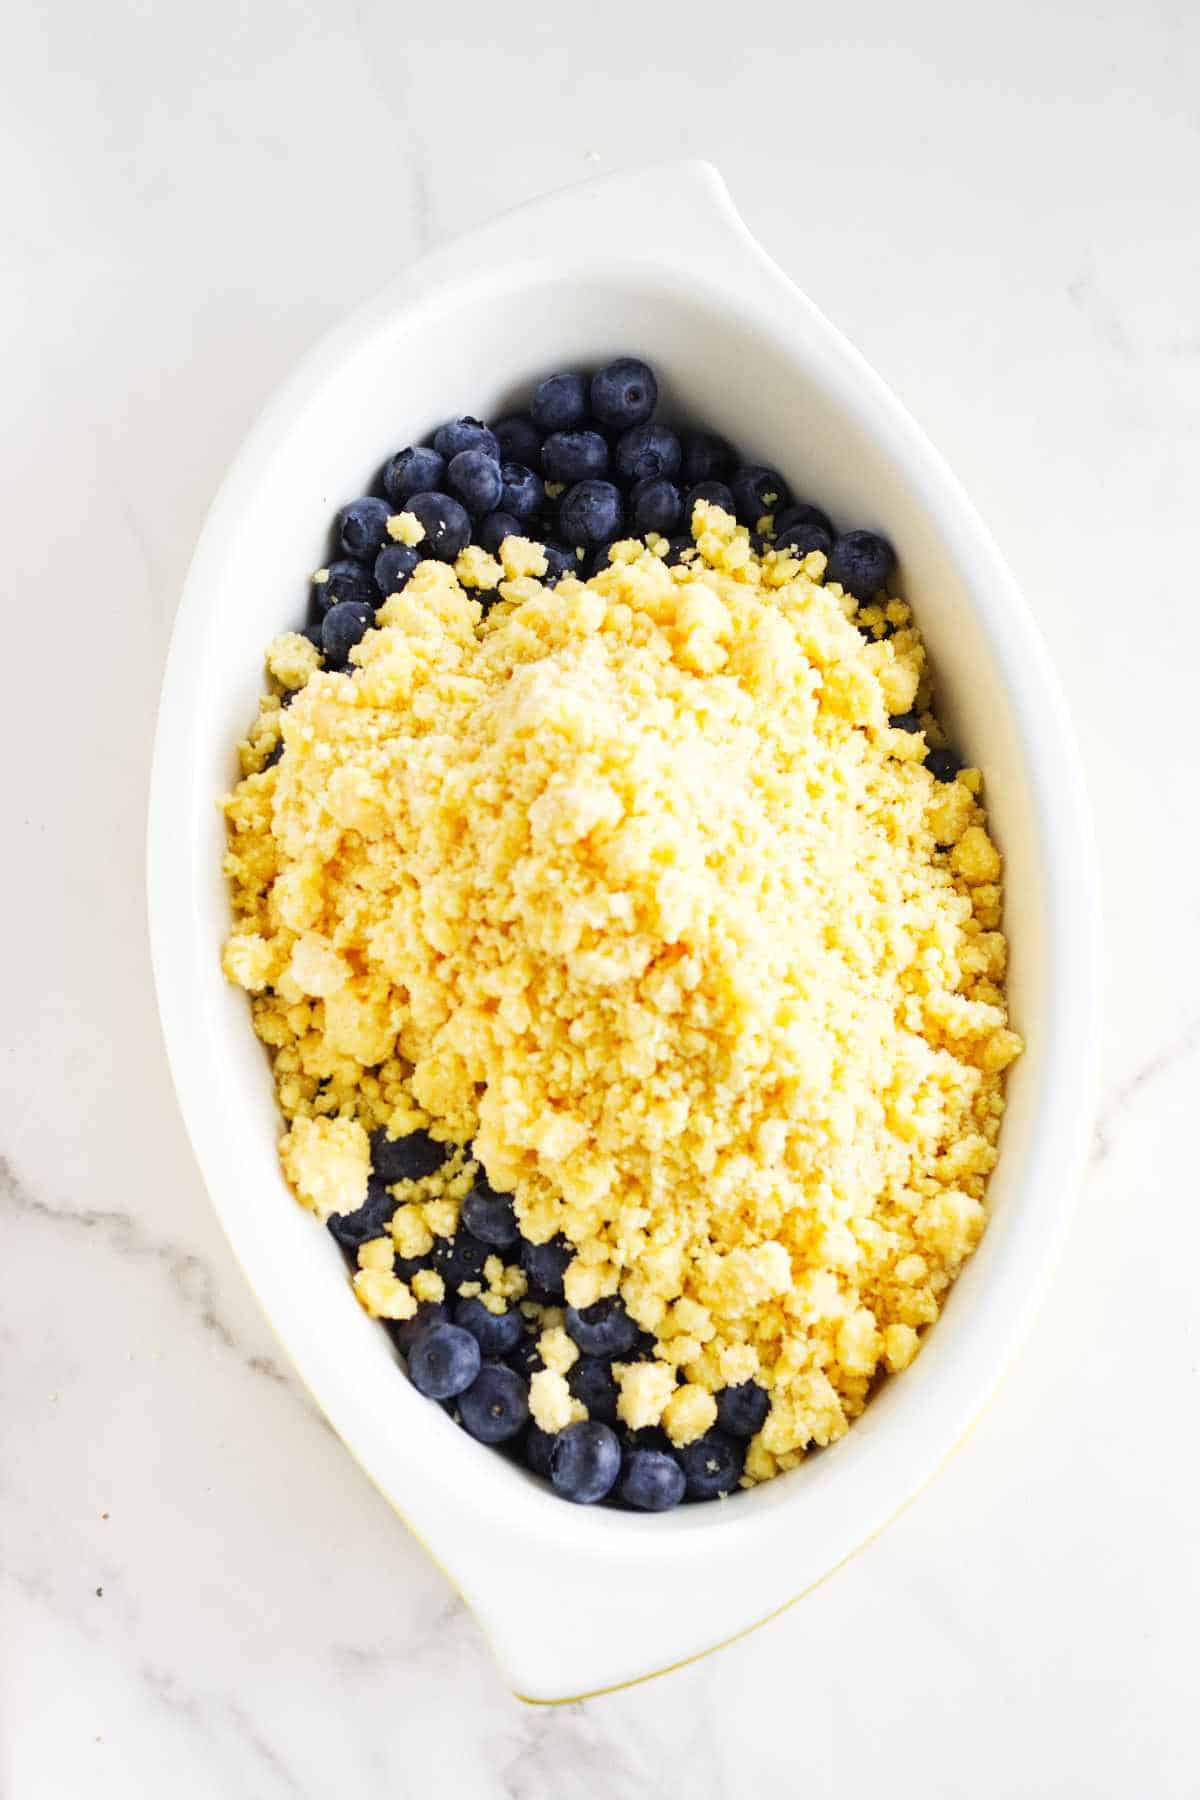 crumble mixture spread out on top of blueberries in a baking dish.